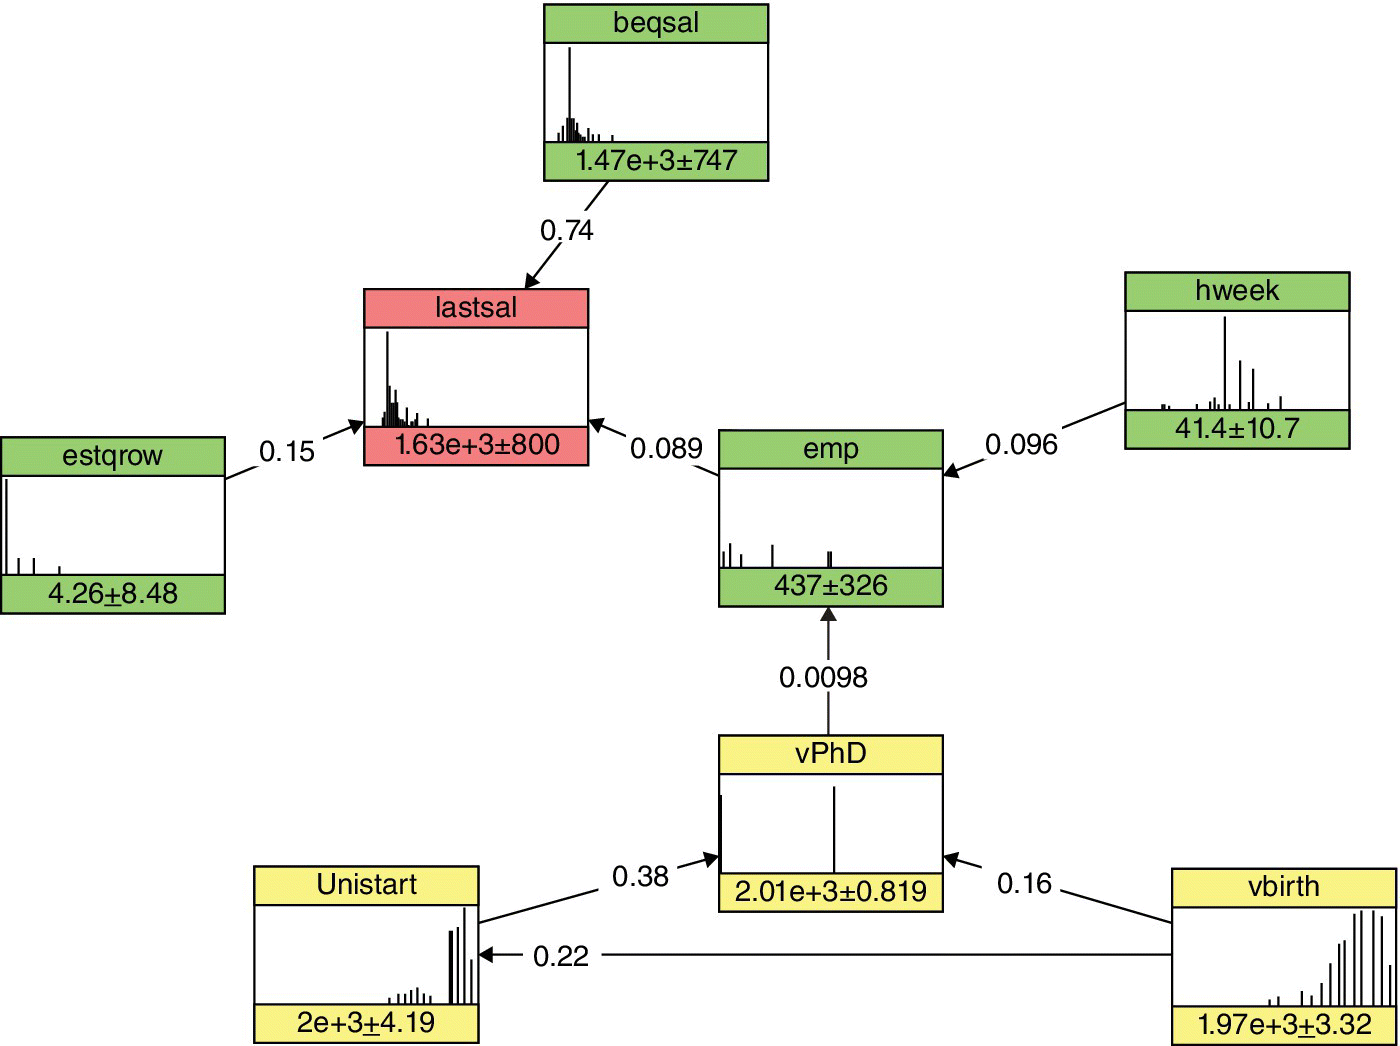 Bayesian network for the Stella dataset with connected boxes labeled beqsal, lastsal, estqrow, emp, hweek, vPhD, Unistart, and vbirth.